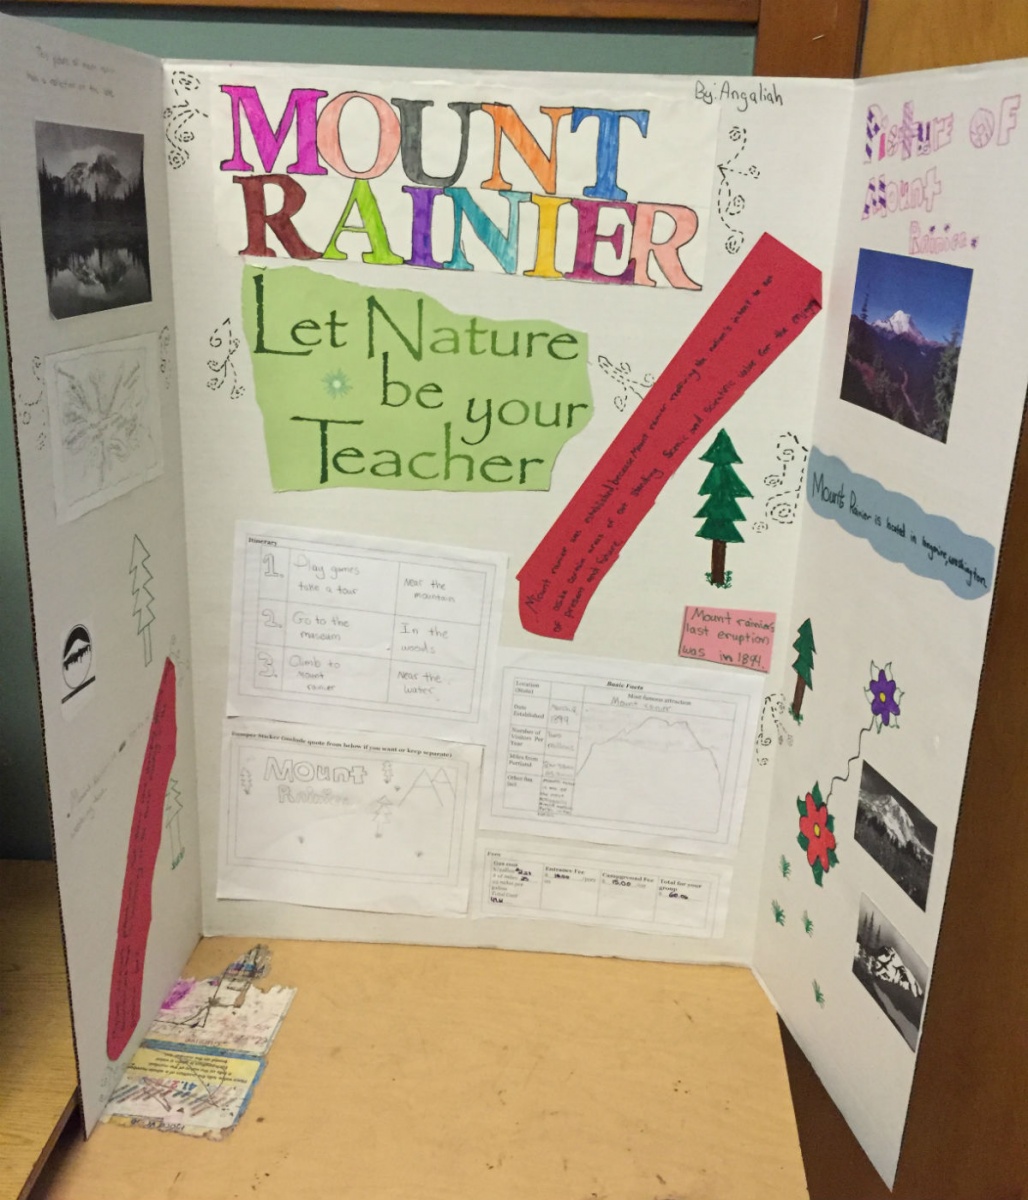 A vertical school project poster board that says "Mount Rainier - Let Nature Be Your Teacher."